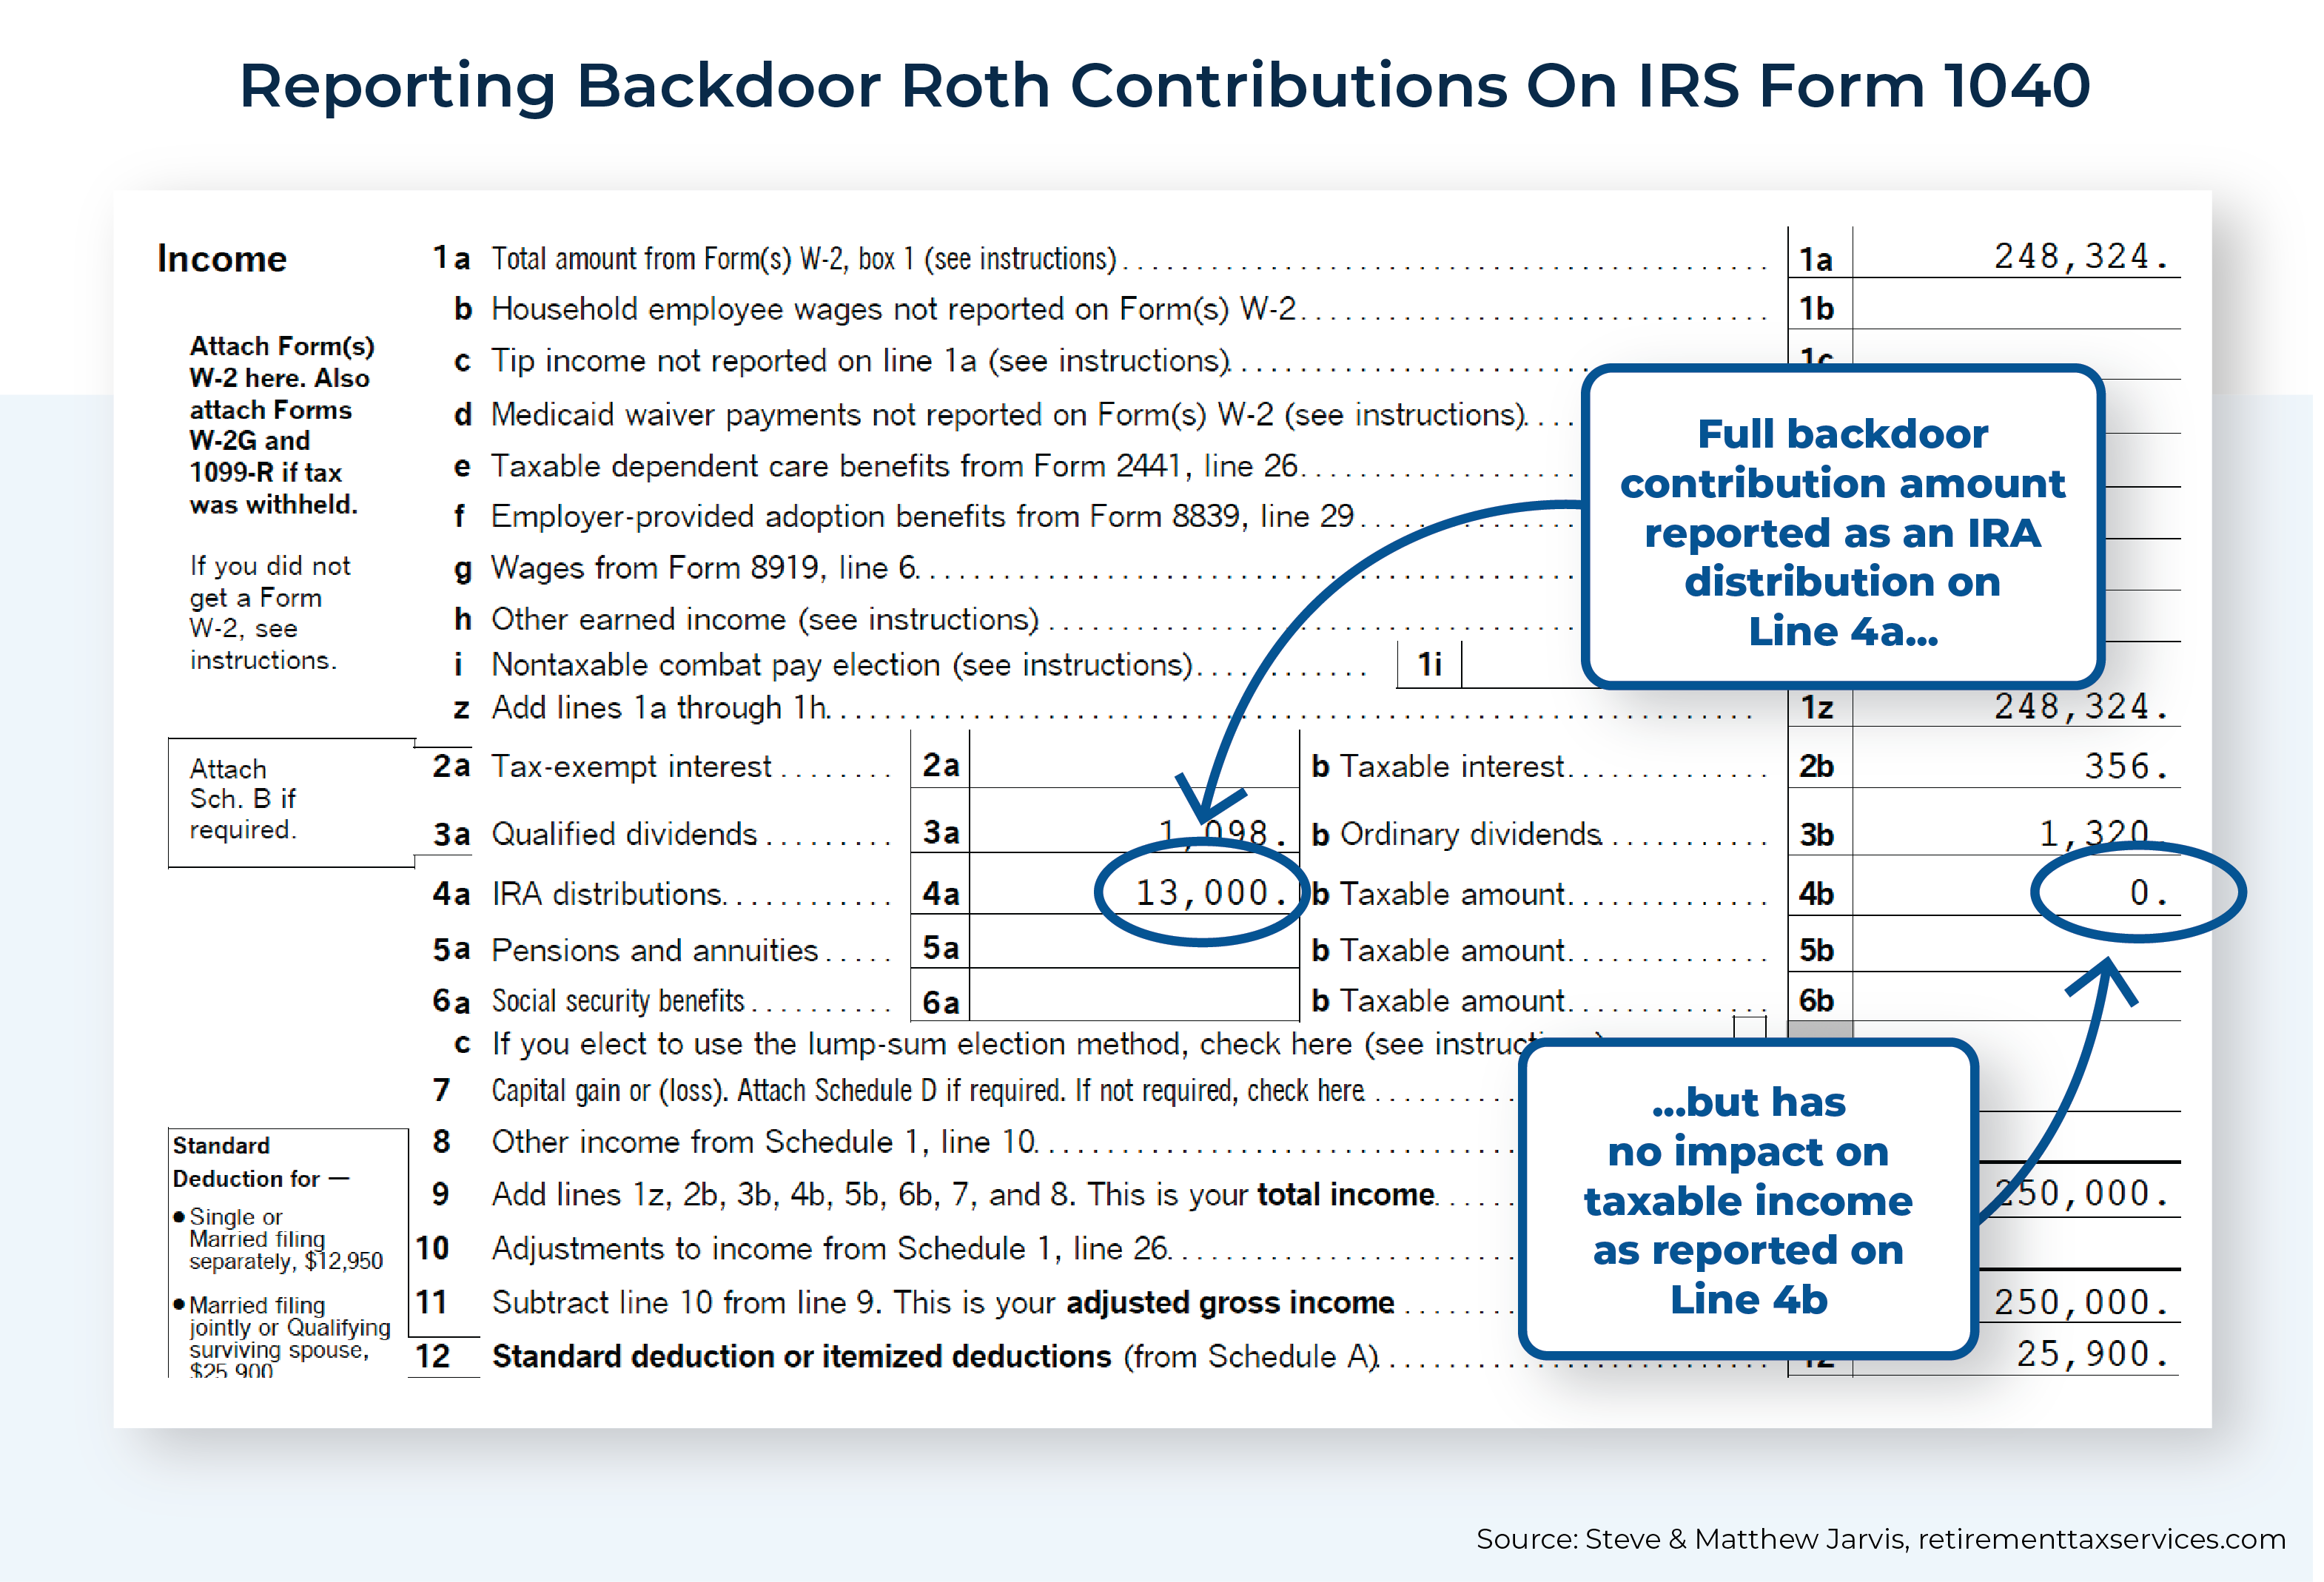 Reporting Backdoor Roth Contributions On IRS Form